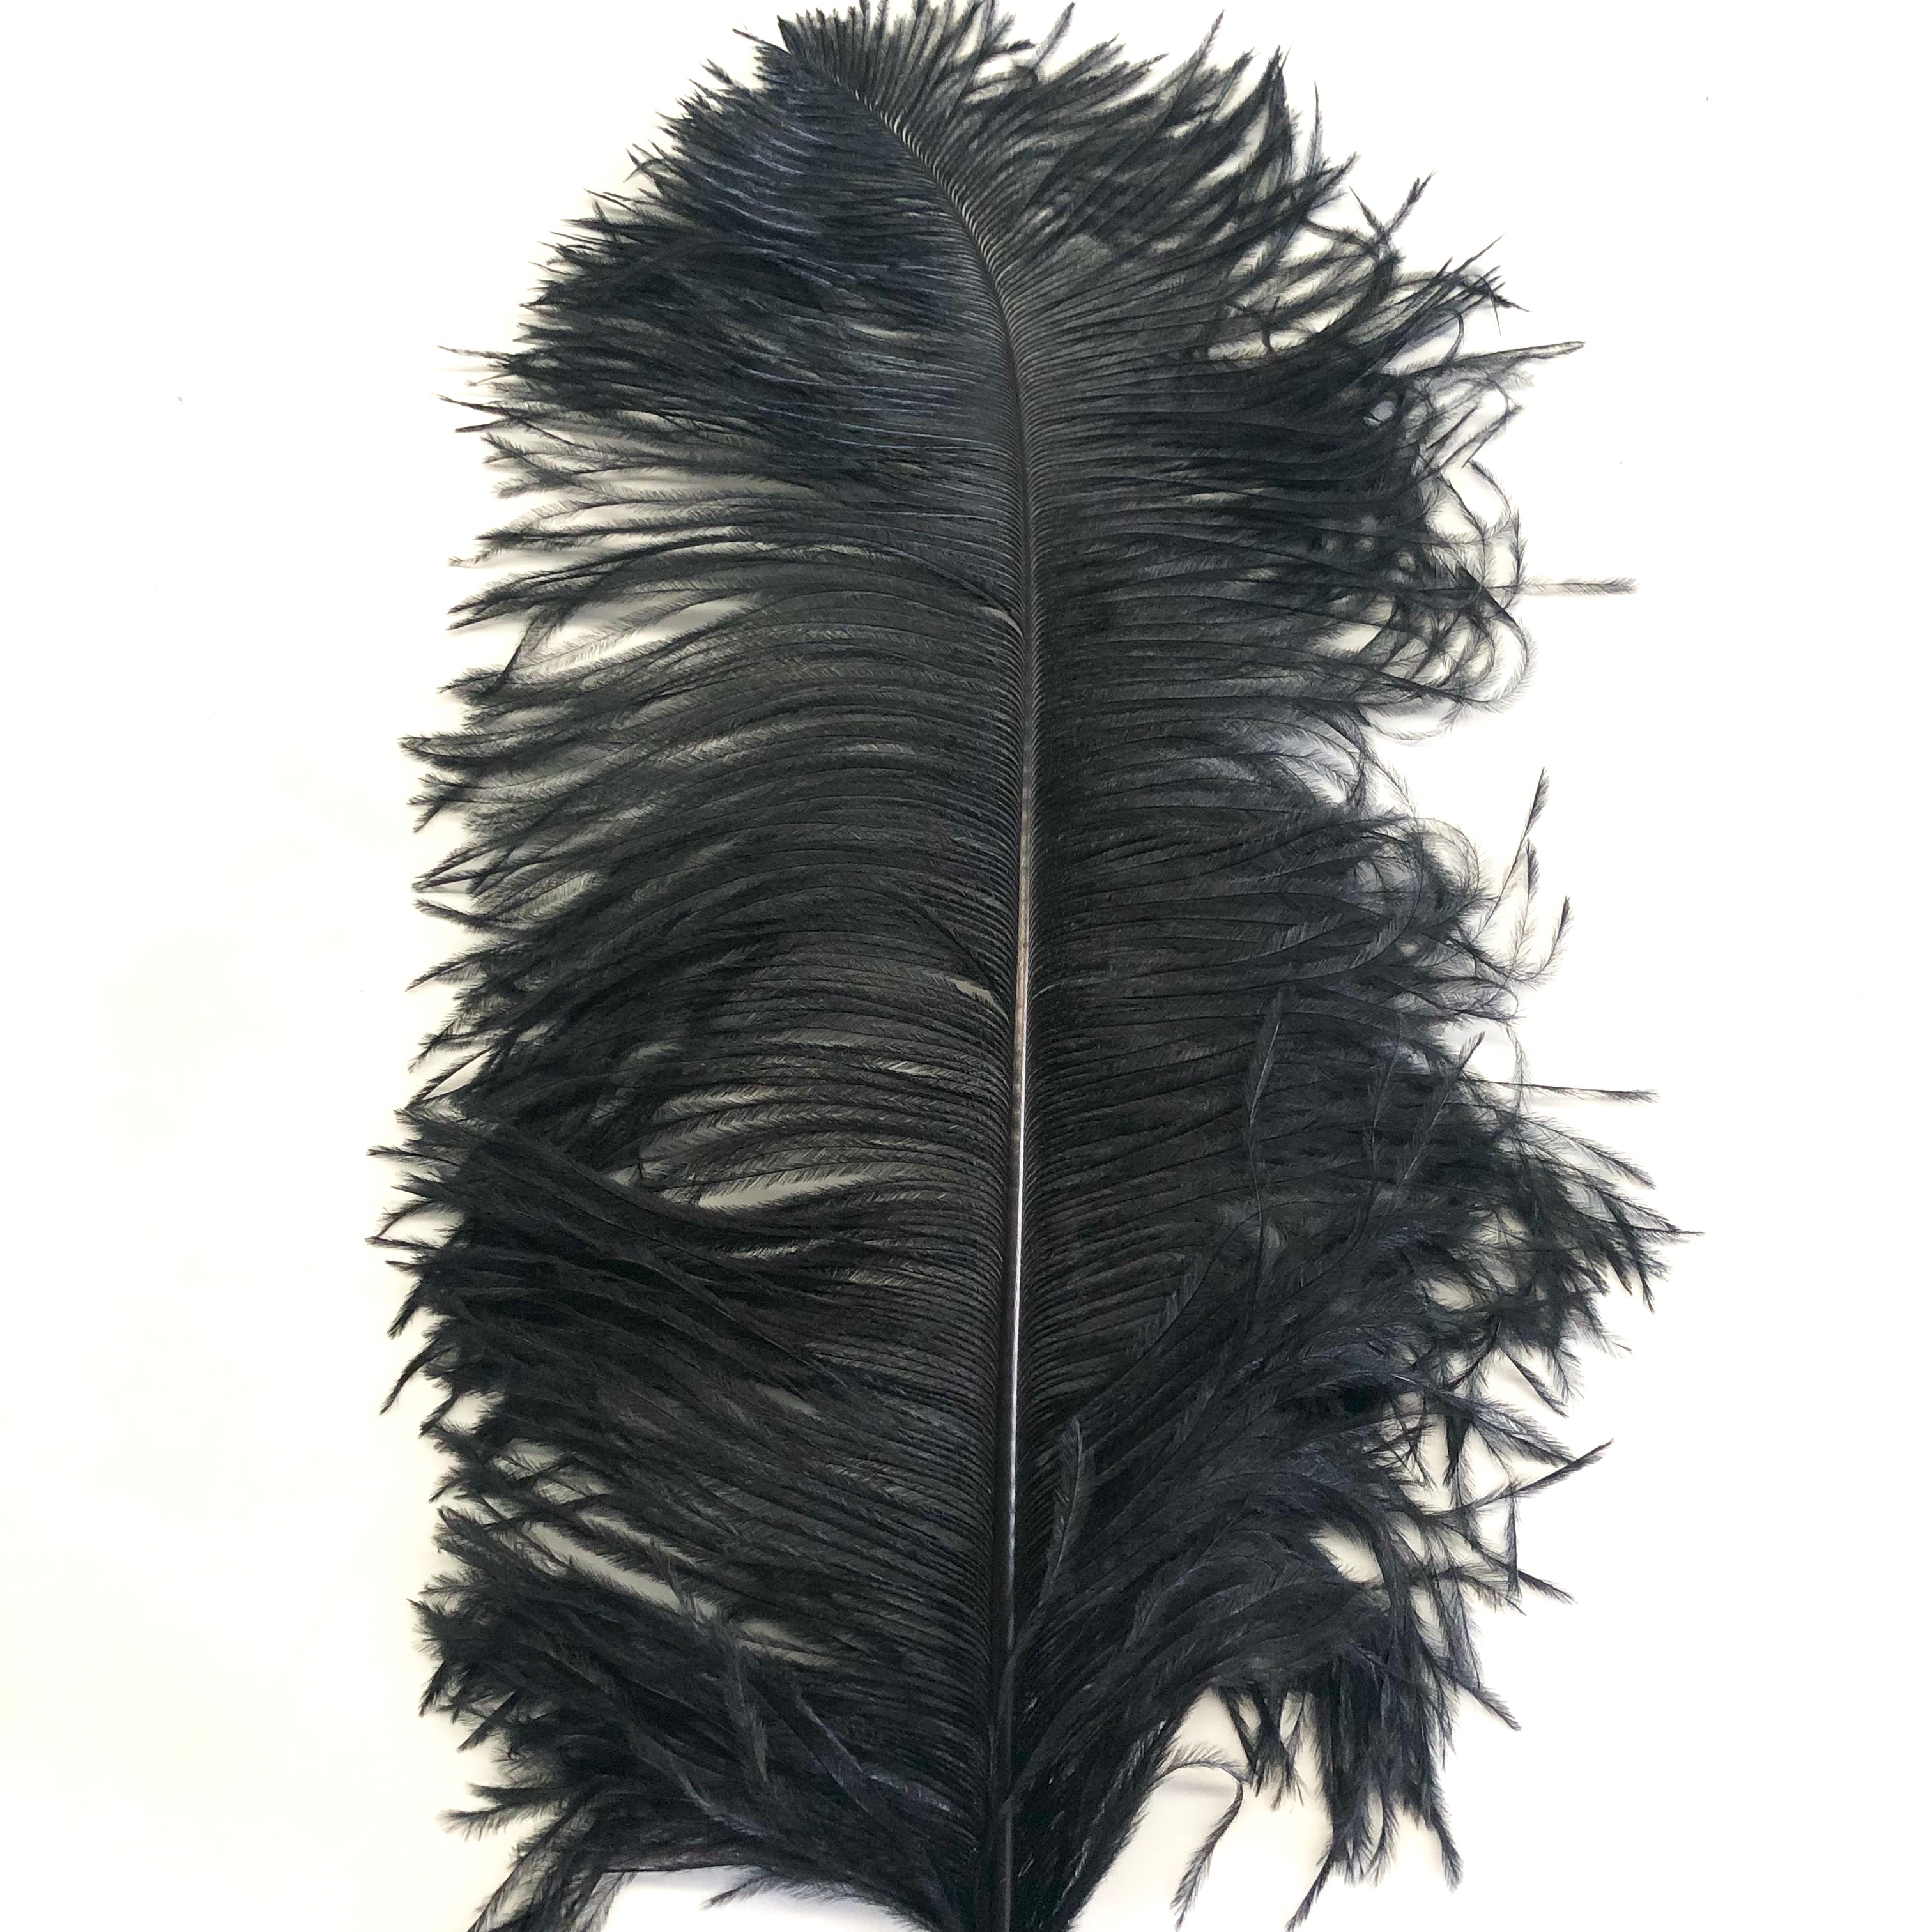 Ostrich Wing Feather Plumes 60-65cm (24-26") - Black